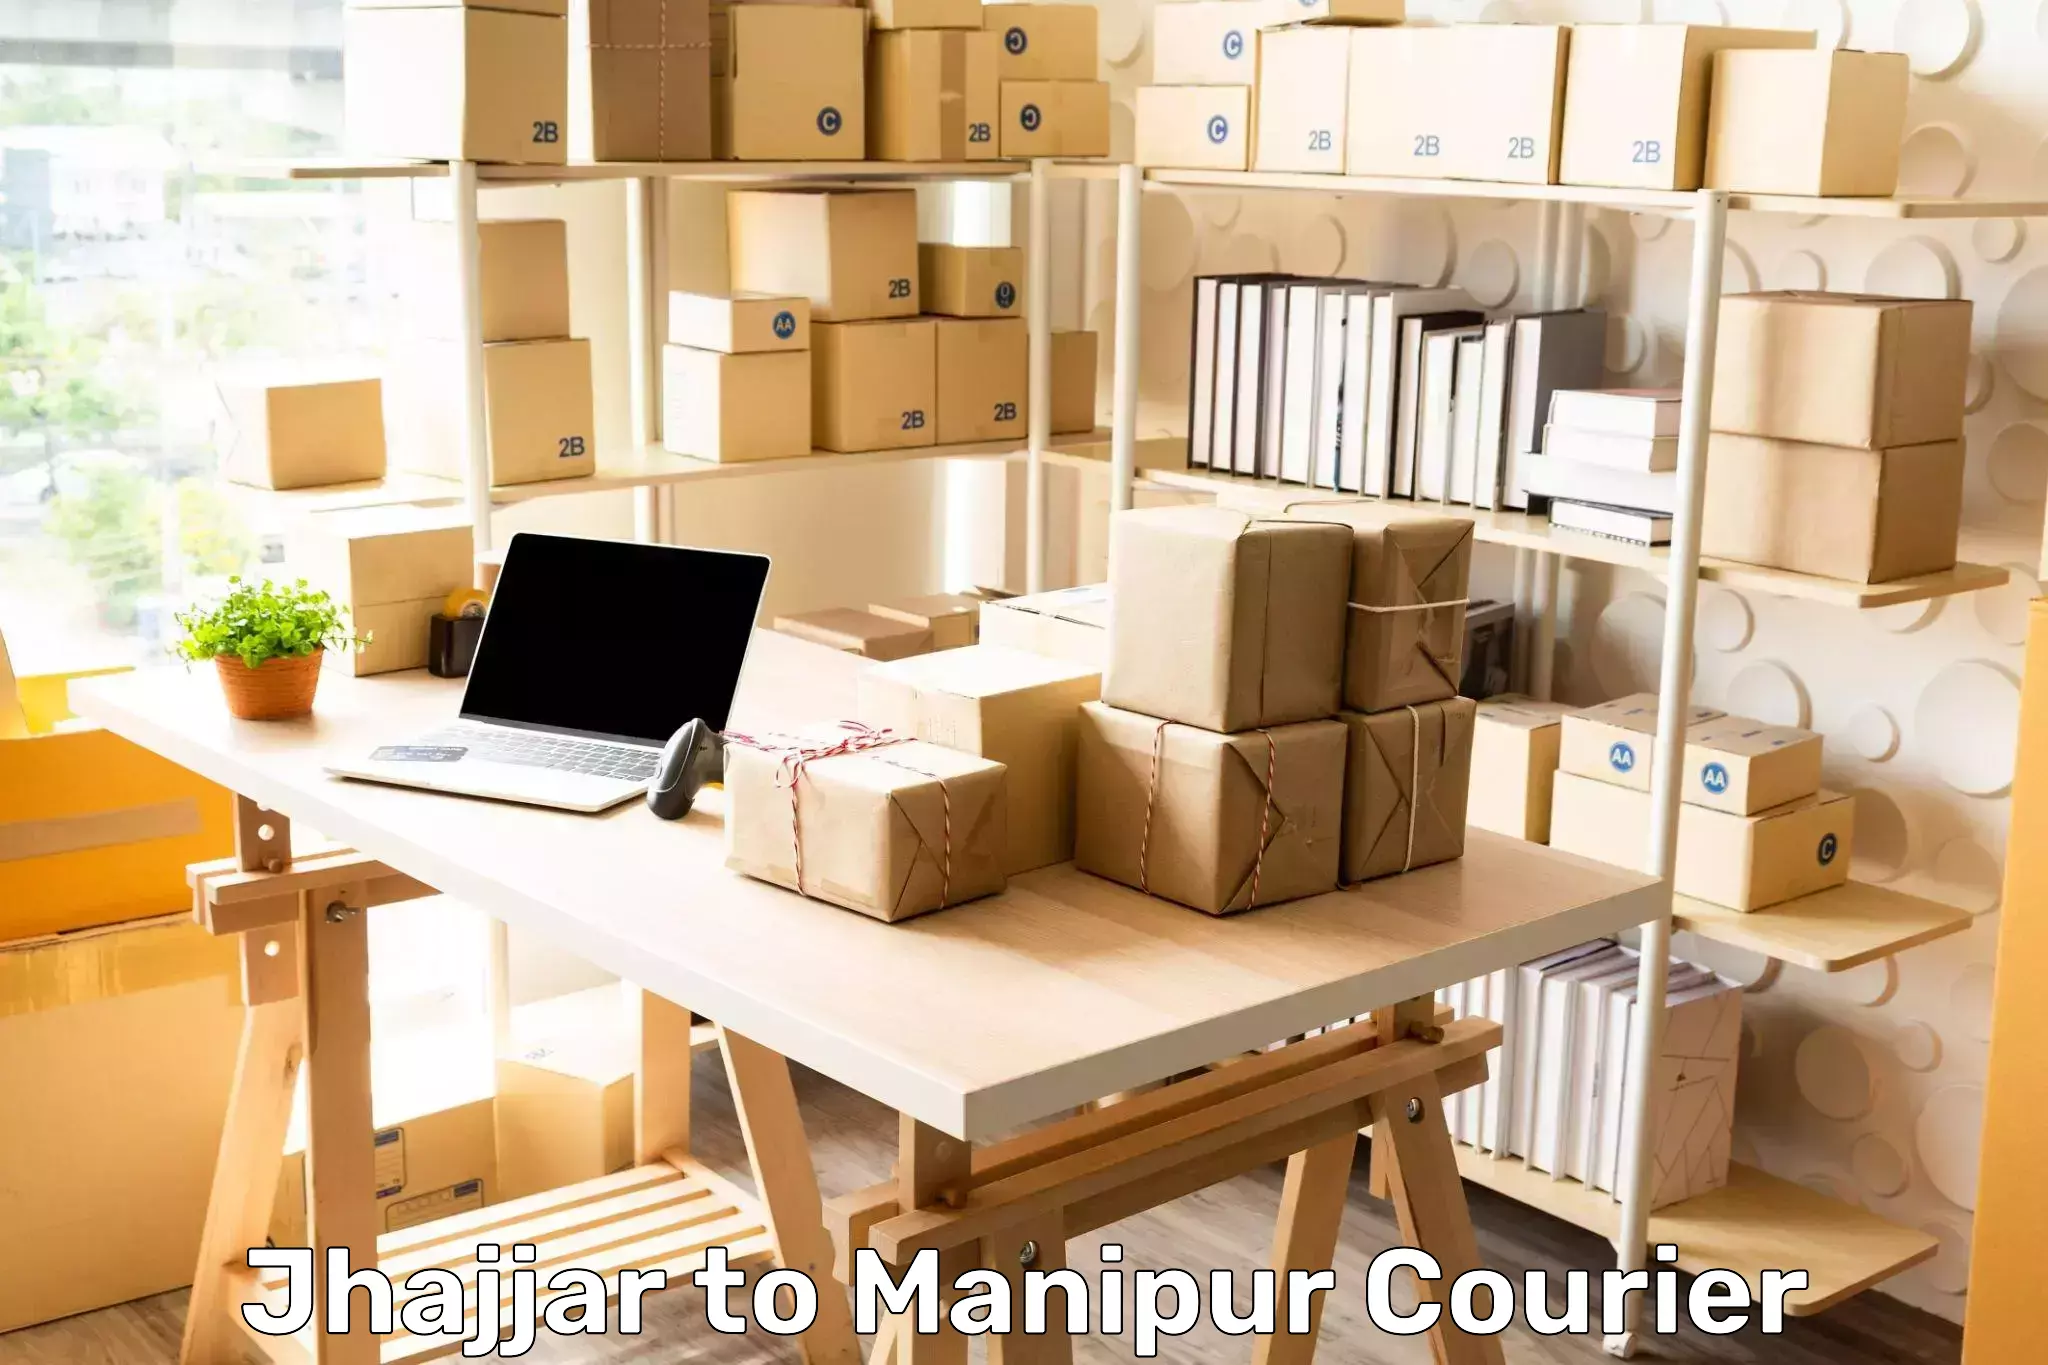 Delivery service partnership Jhajjar to Manipur